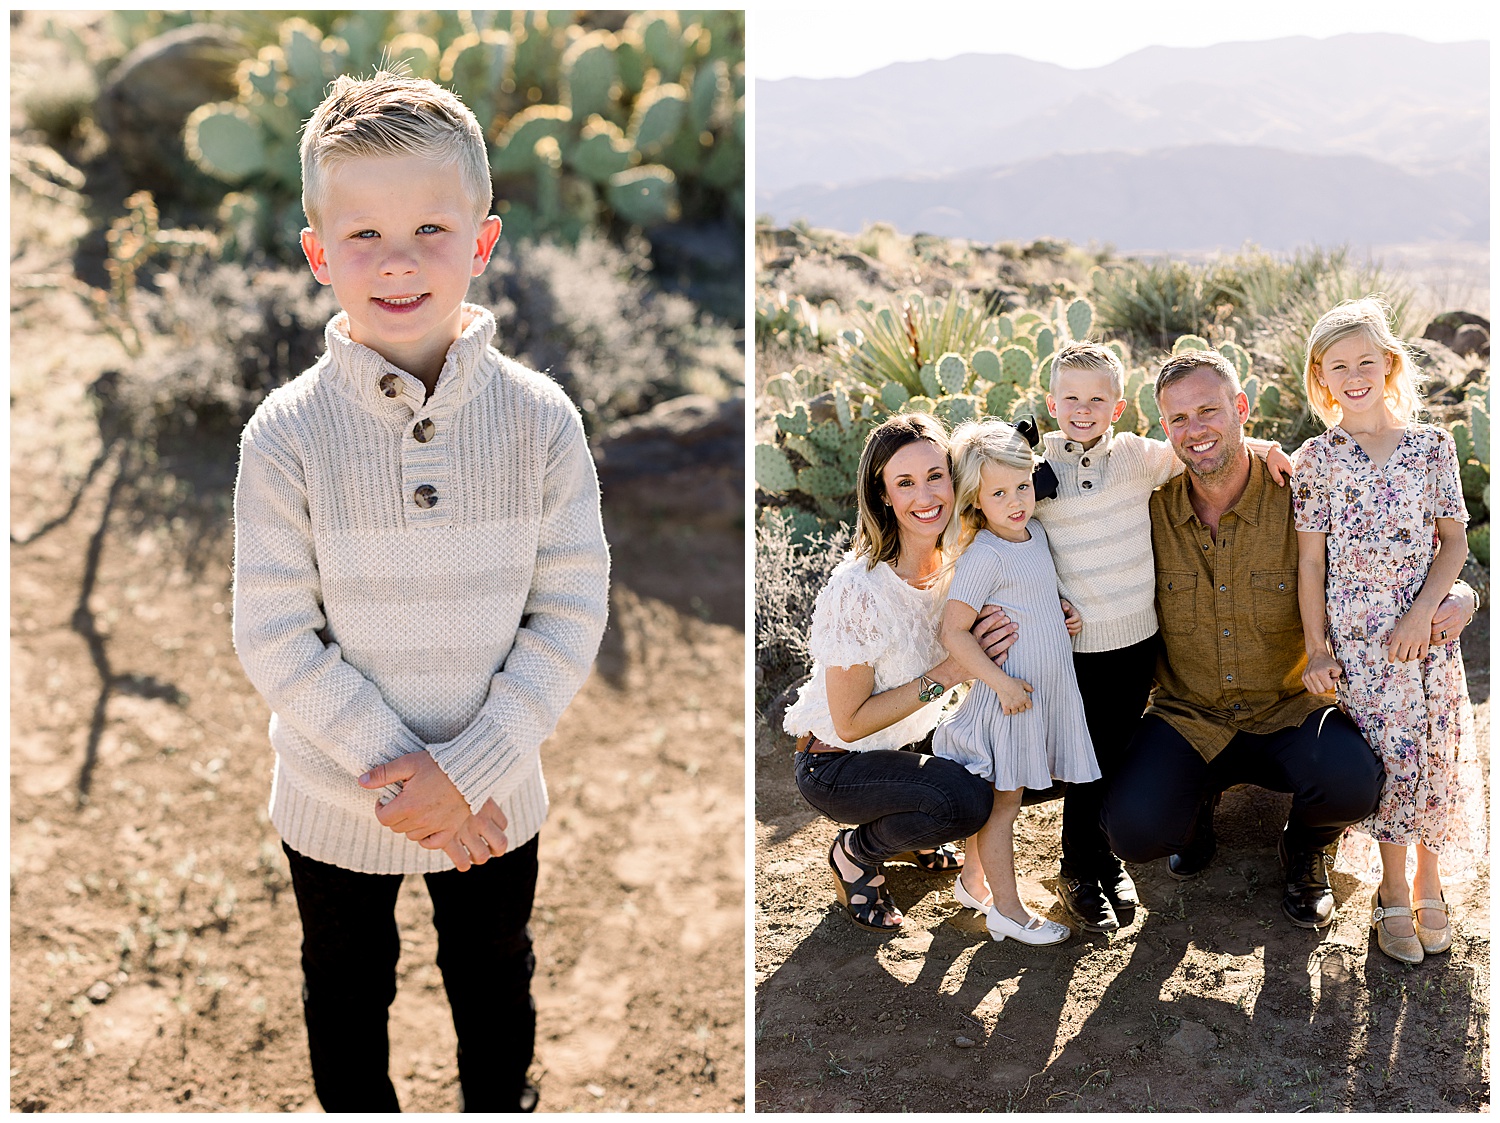 Family session in North phoenix, Arizona, desert and mountain views